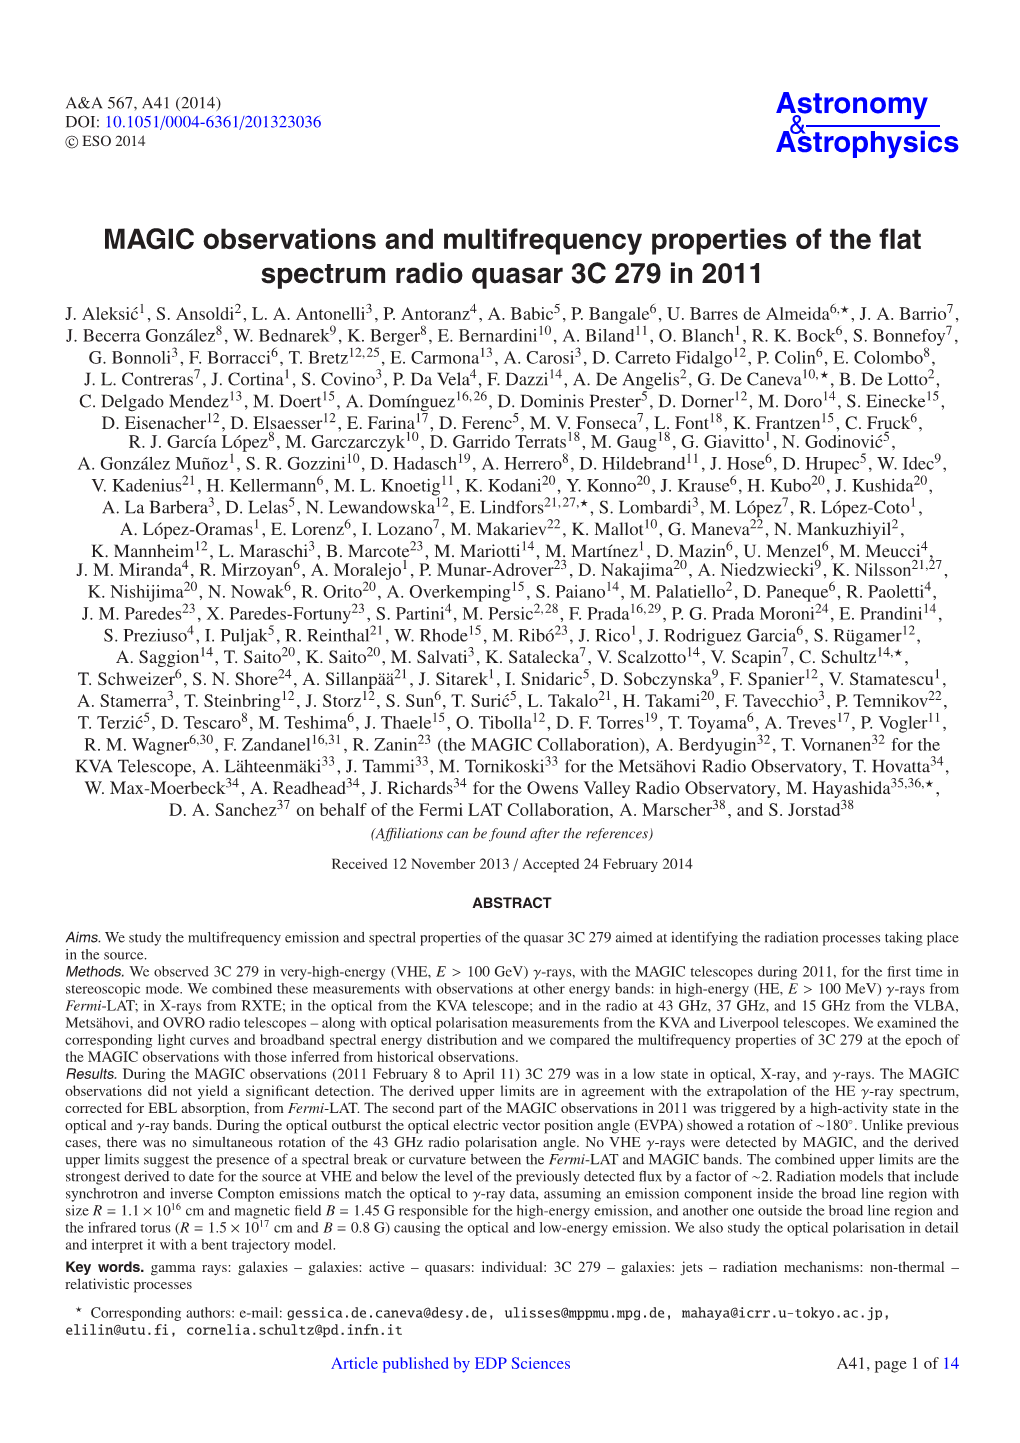 MAGIC Observations and Multifrequency Properties of the Flat Spectrum Radio Quasar 3C 279 in 2011